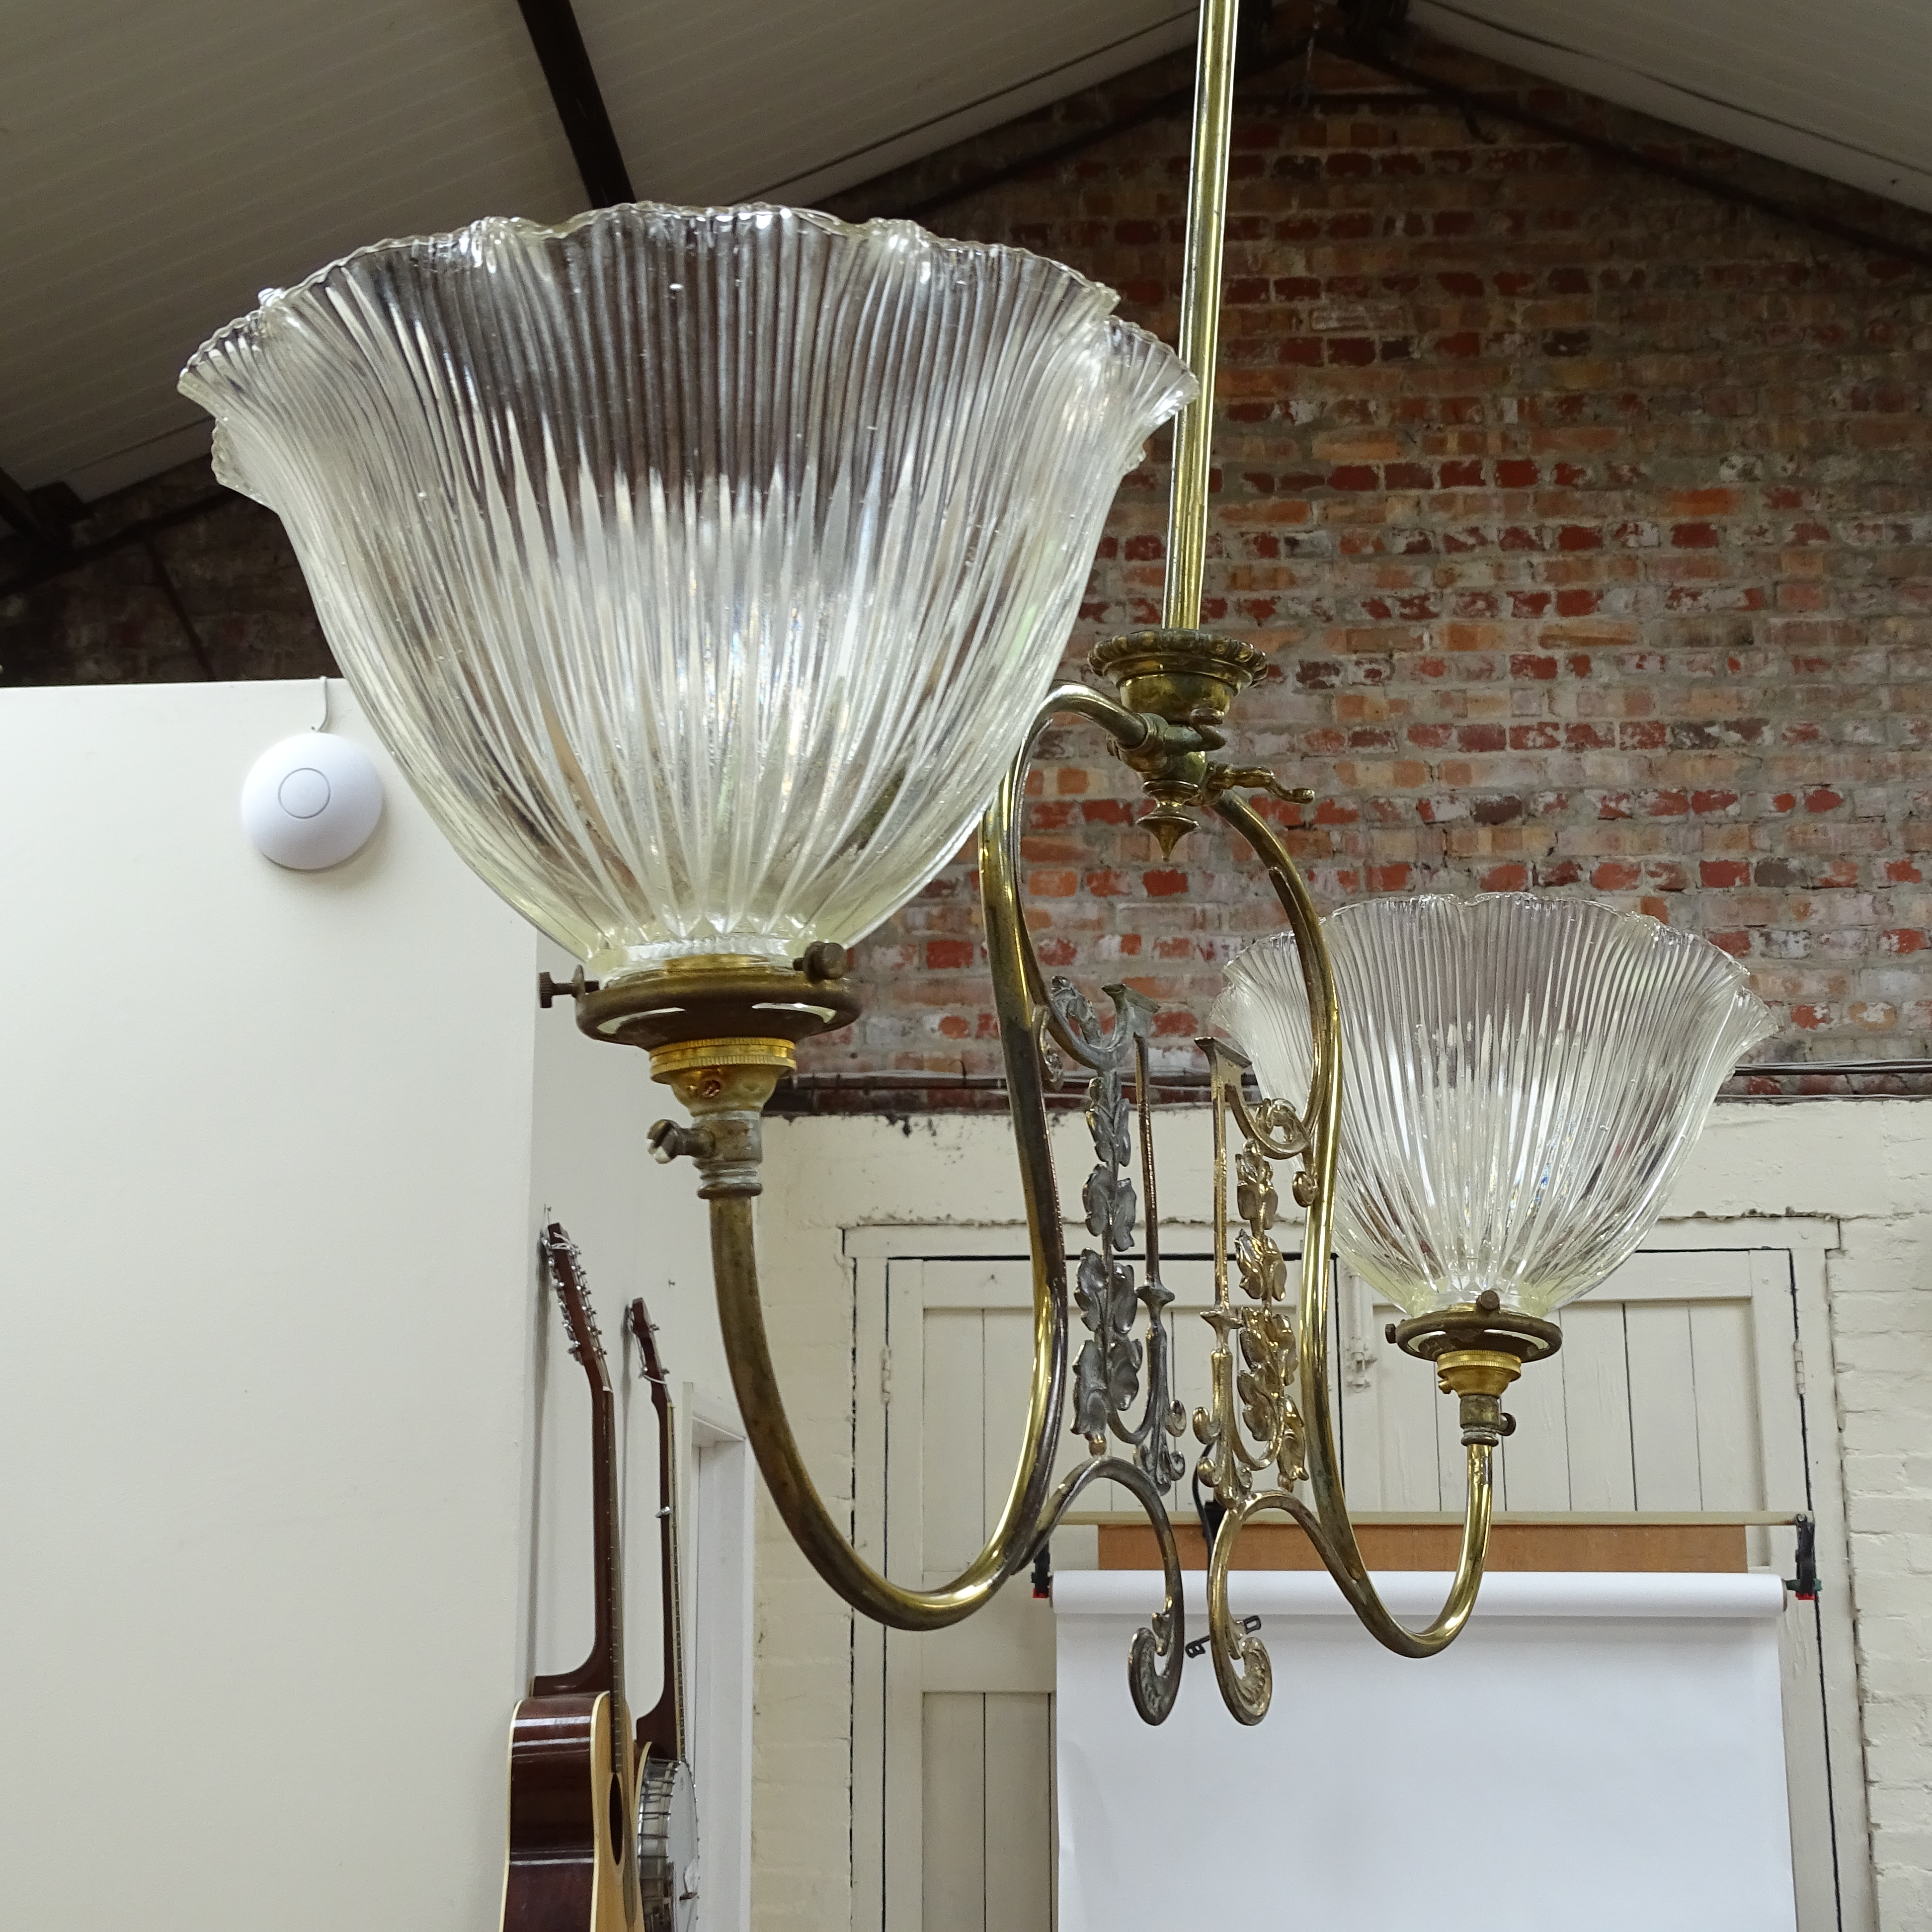 A Large Brass 2 shade gas lamp converted to electric - Image 2 of 2